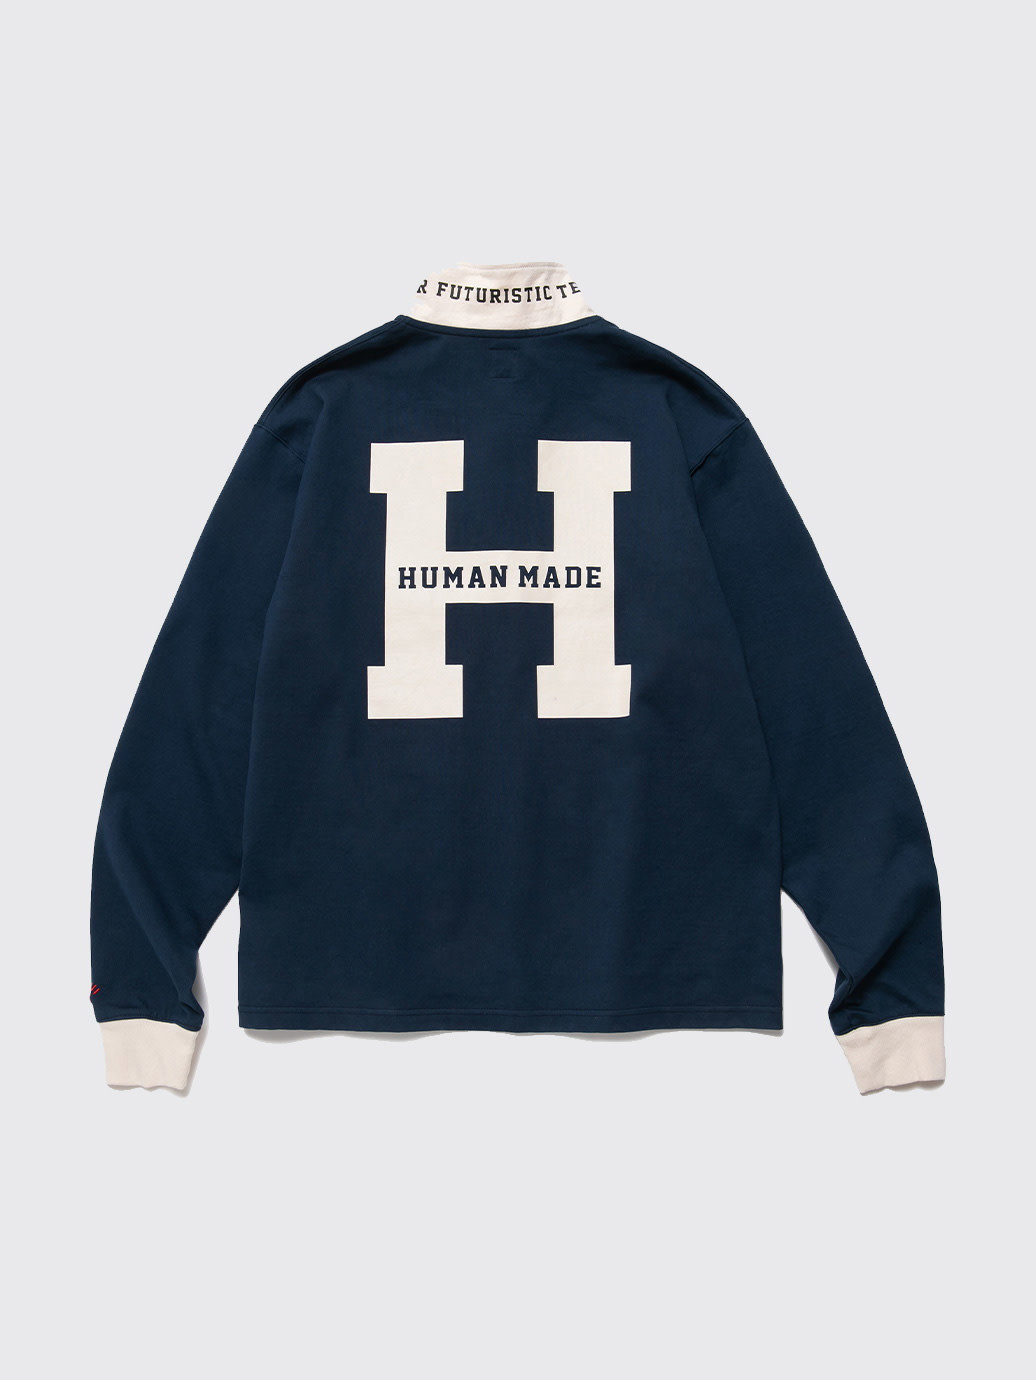 HUMAN MADE RUGBY S/S SHIRT コムドット ゆうた着用-